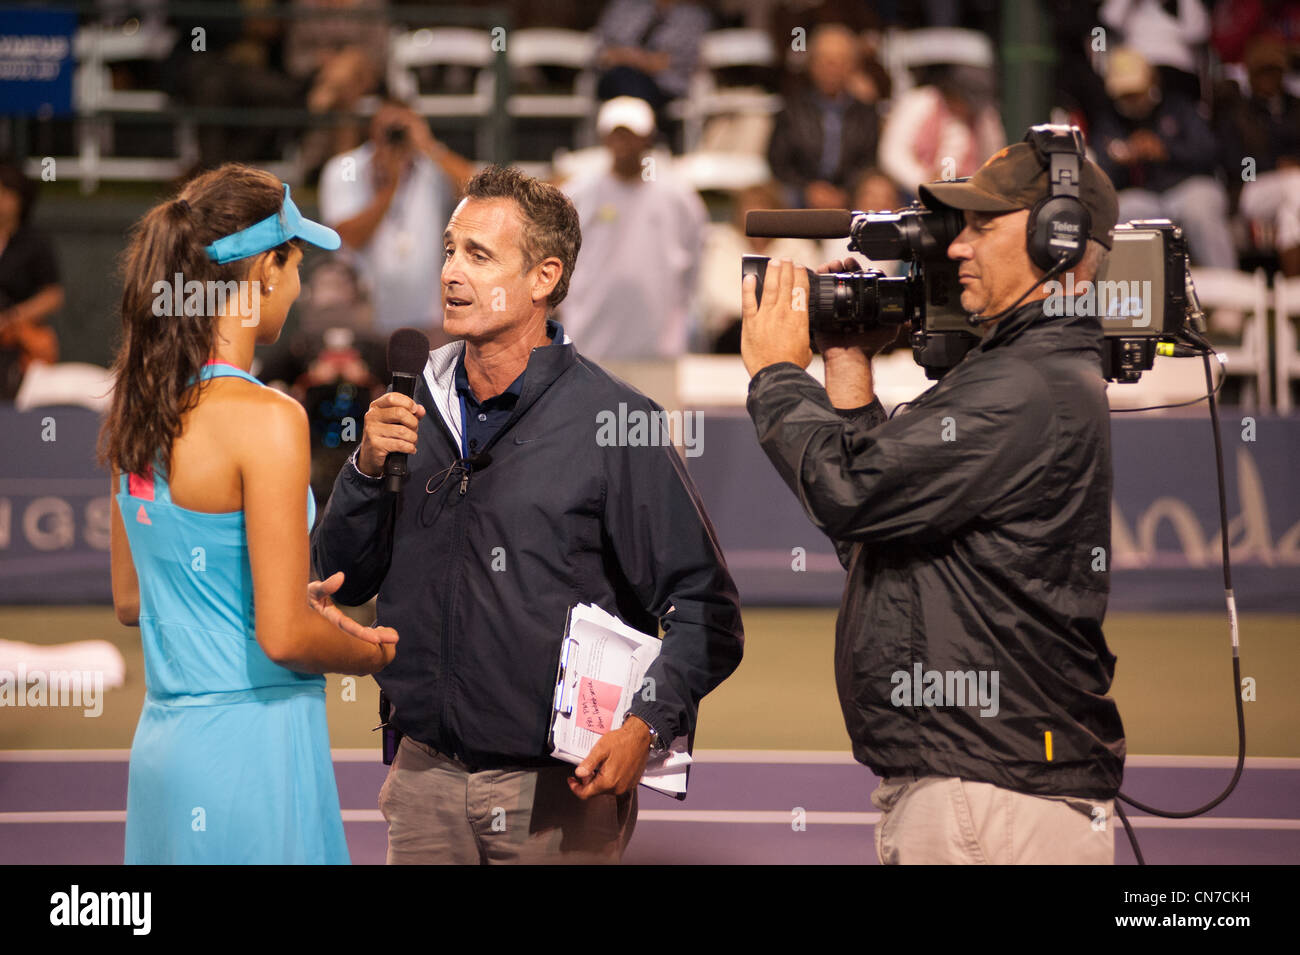 Tennis player, Ana Ivanovic, being interviewed  after her victory at La Costa Resort. Stock Photo